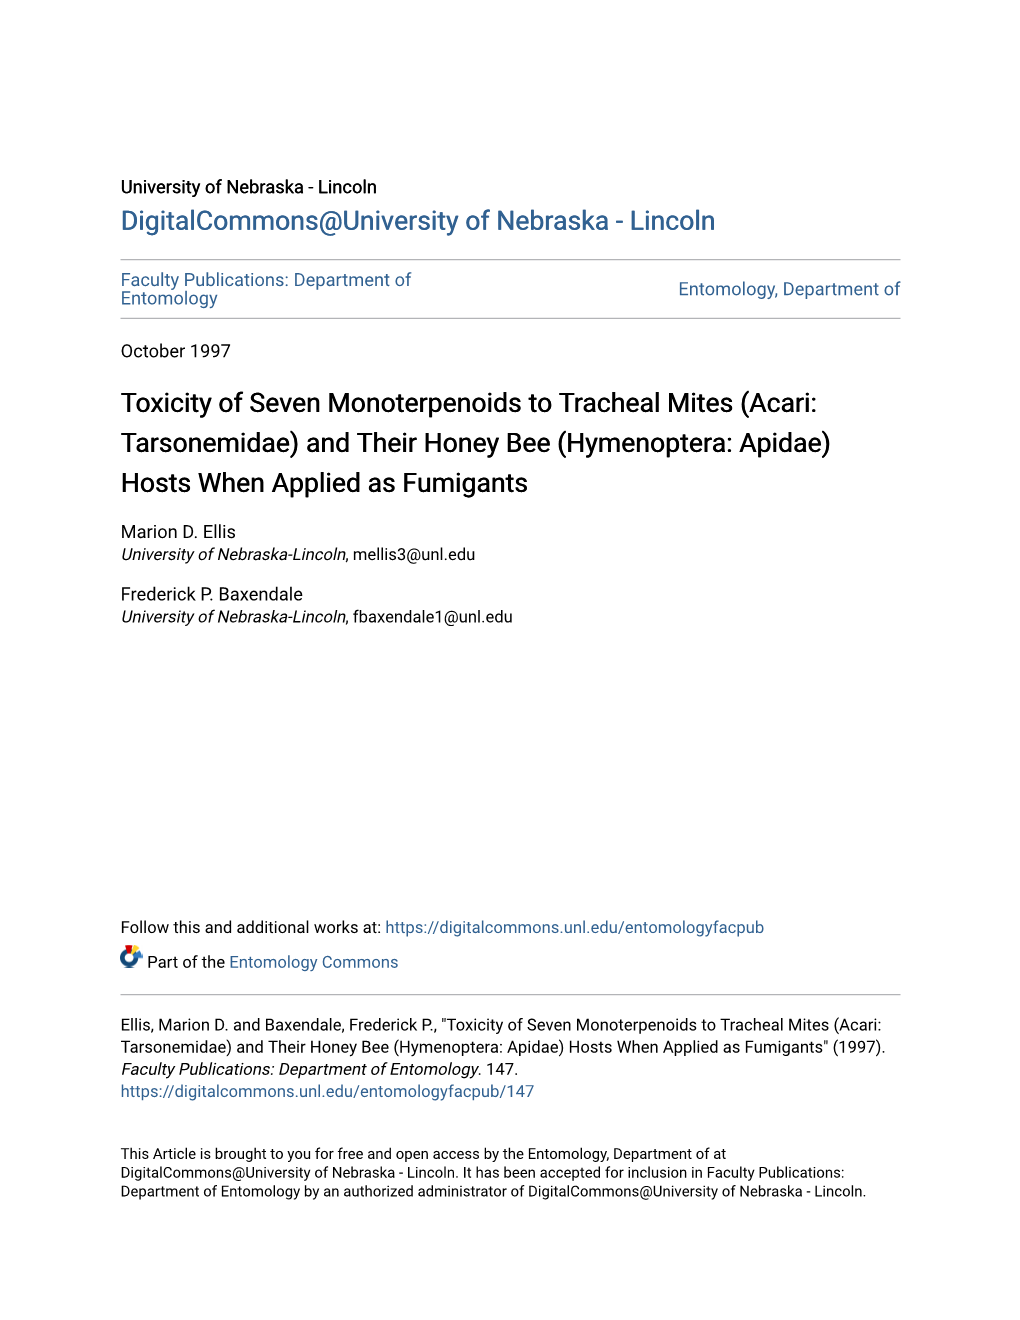 Toxicity of Seven Monoterpenoids to Tracheal Mites (Acari: Tarsonemidae) and Their Honey Bee (Hymenoptera: Apidae) Hosts When Applied As Fumigants